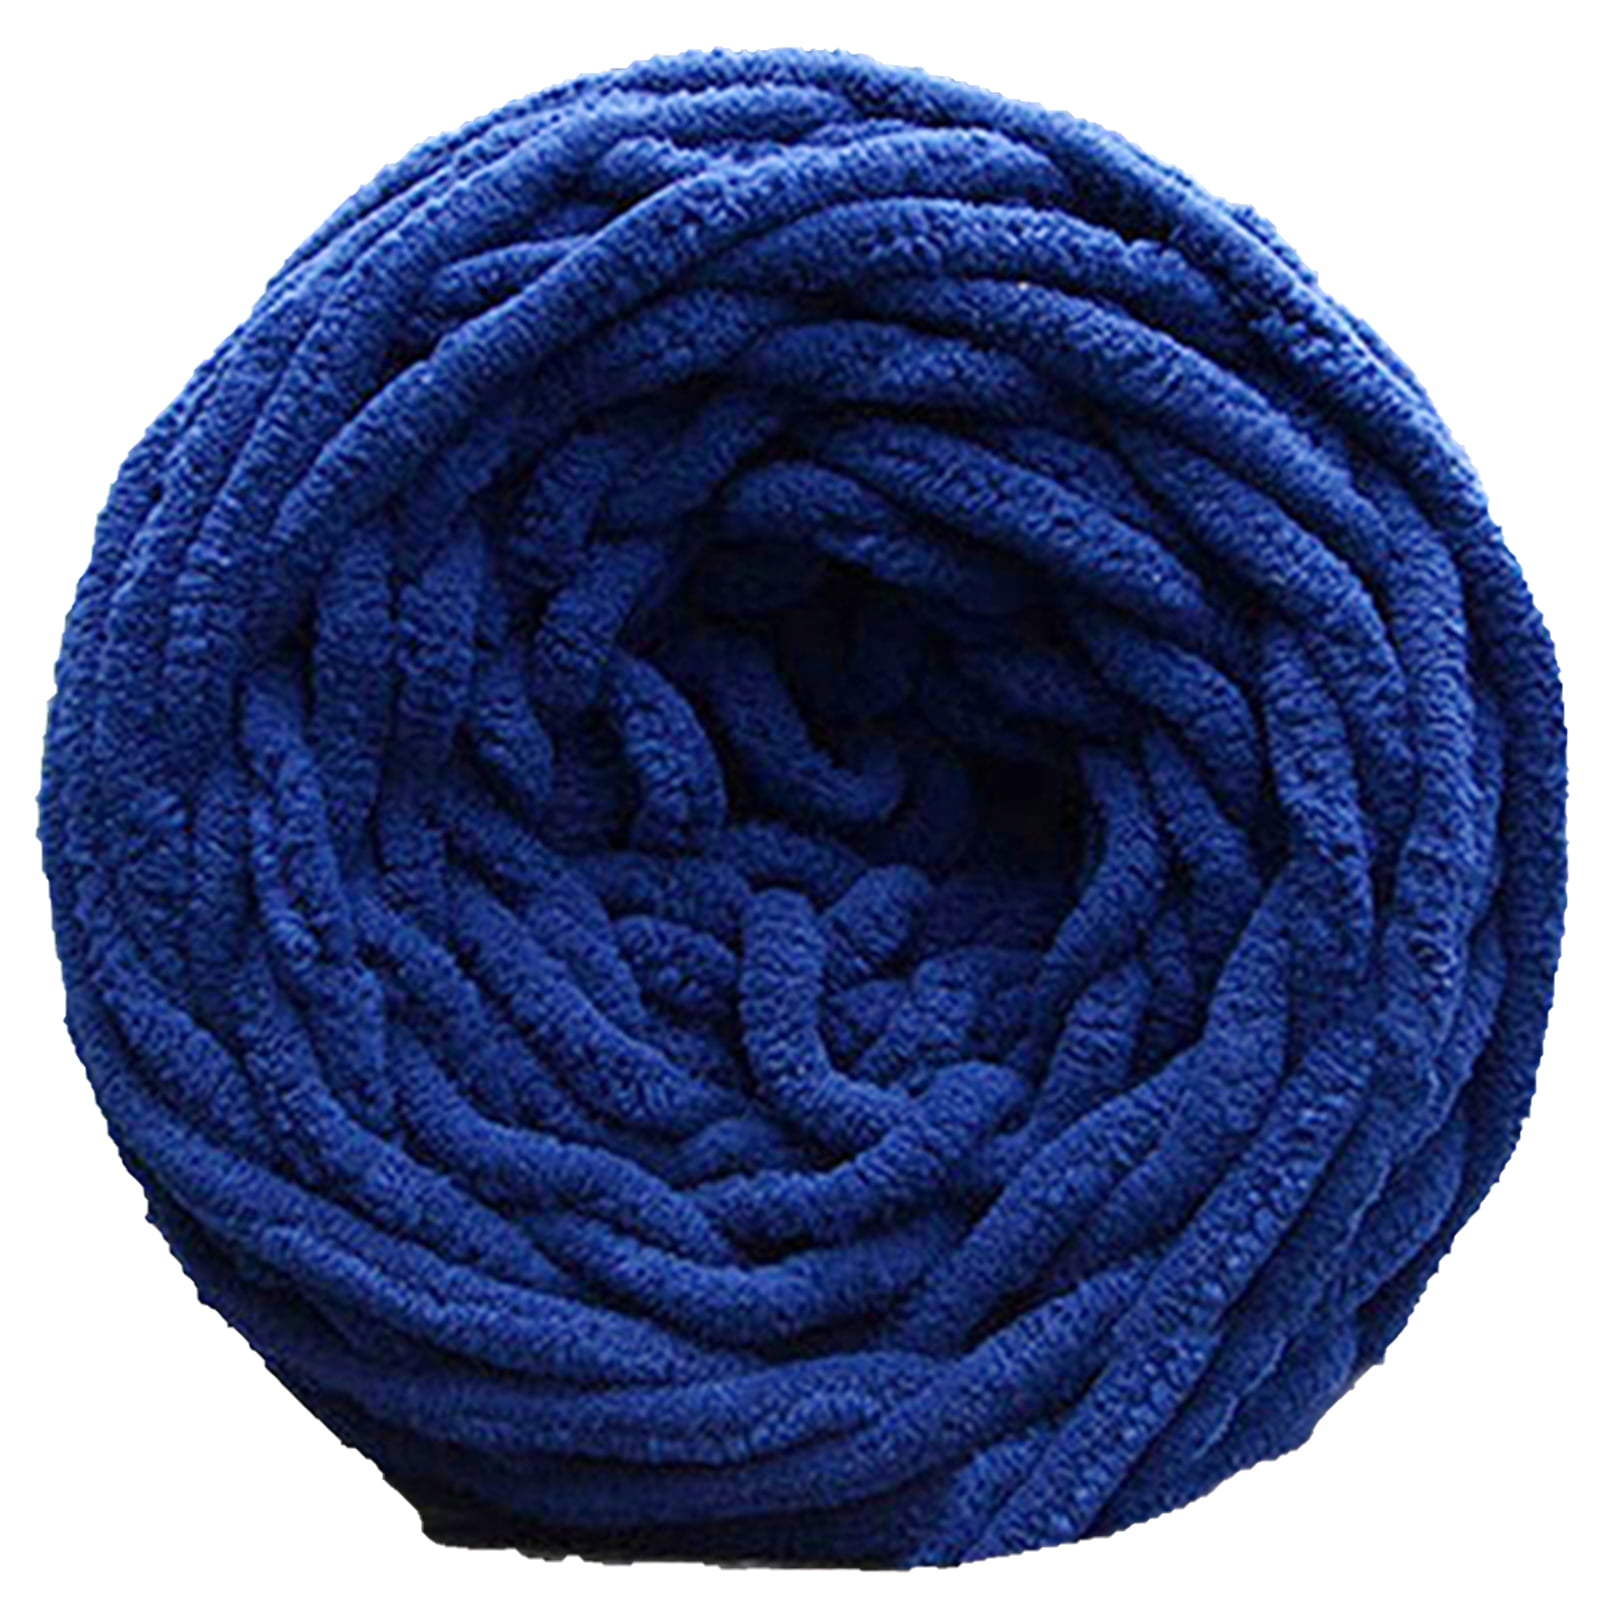 2 Balls Knitting and Crochet Yarn Soft Touch & Comfortable for Baby Cotton  Yarn for Knitting DIY Scarf Sweater Little Doll Thread Yarn 17-Blue